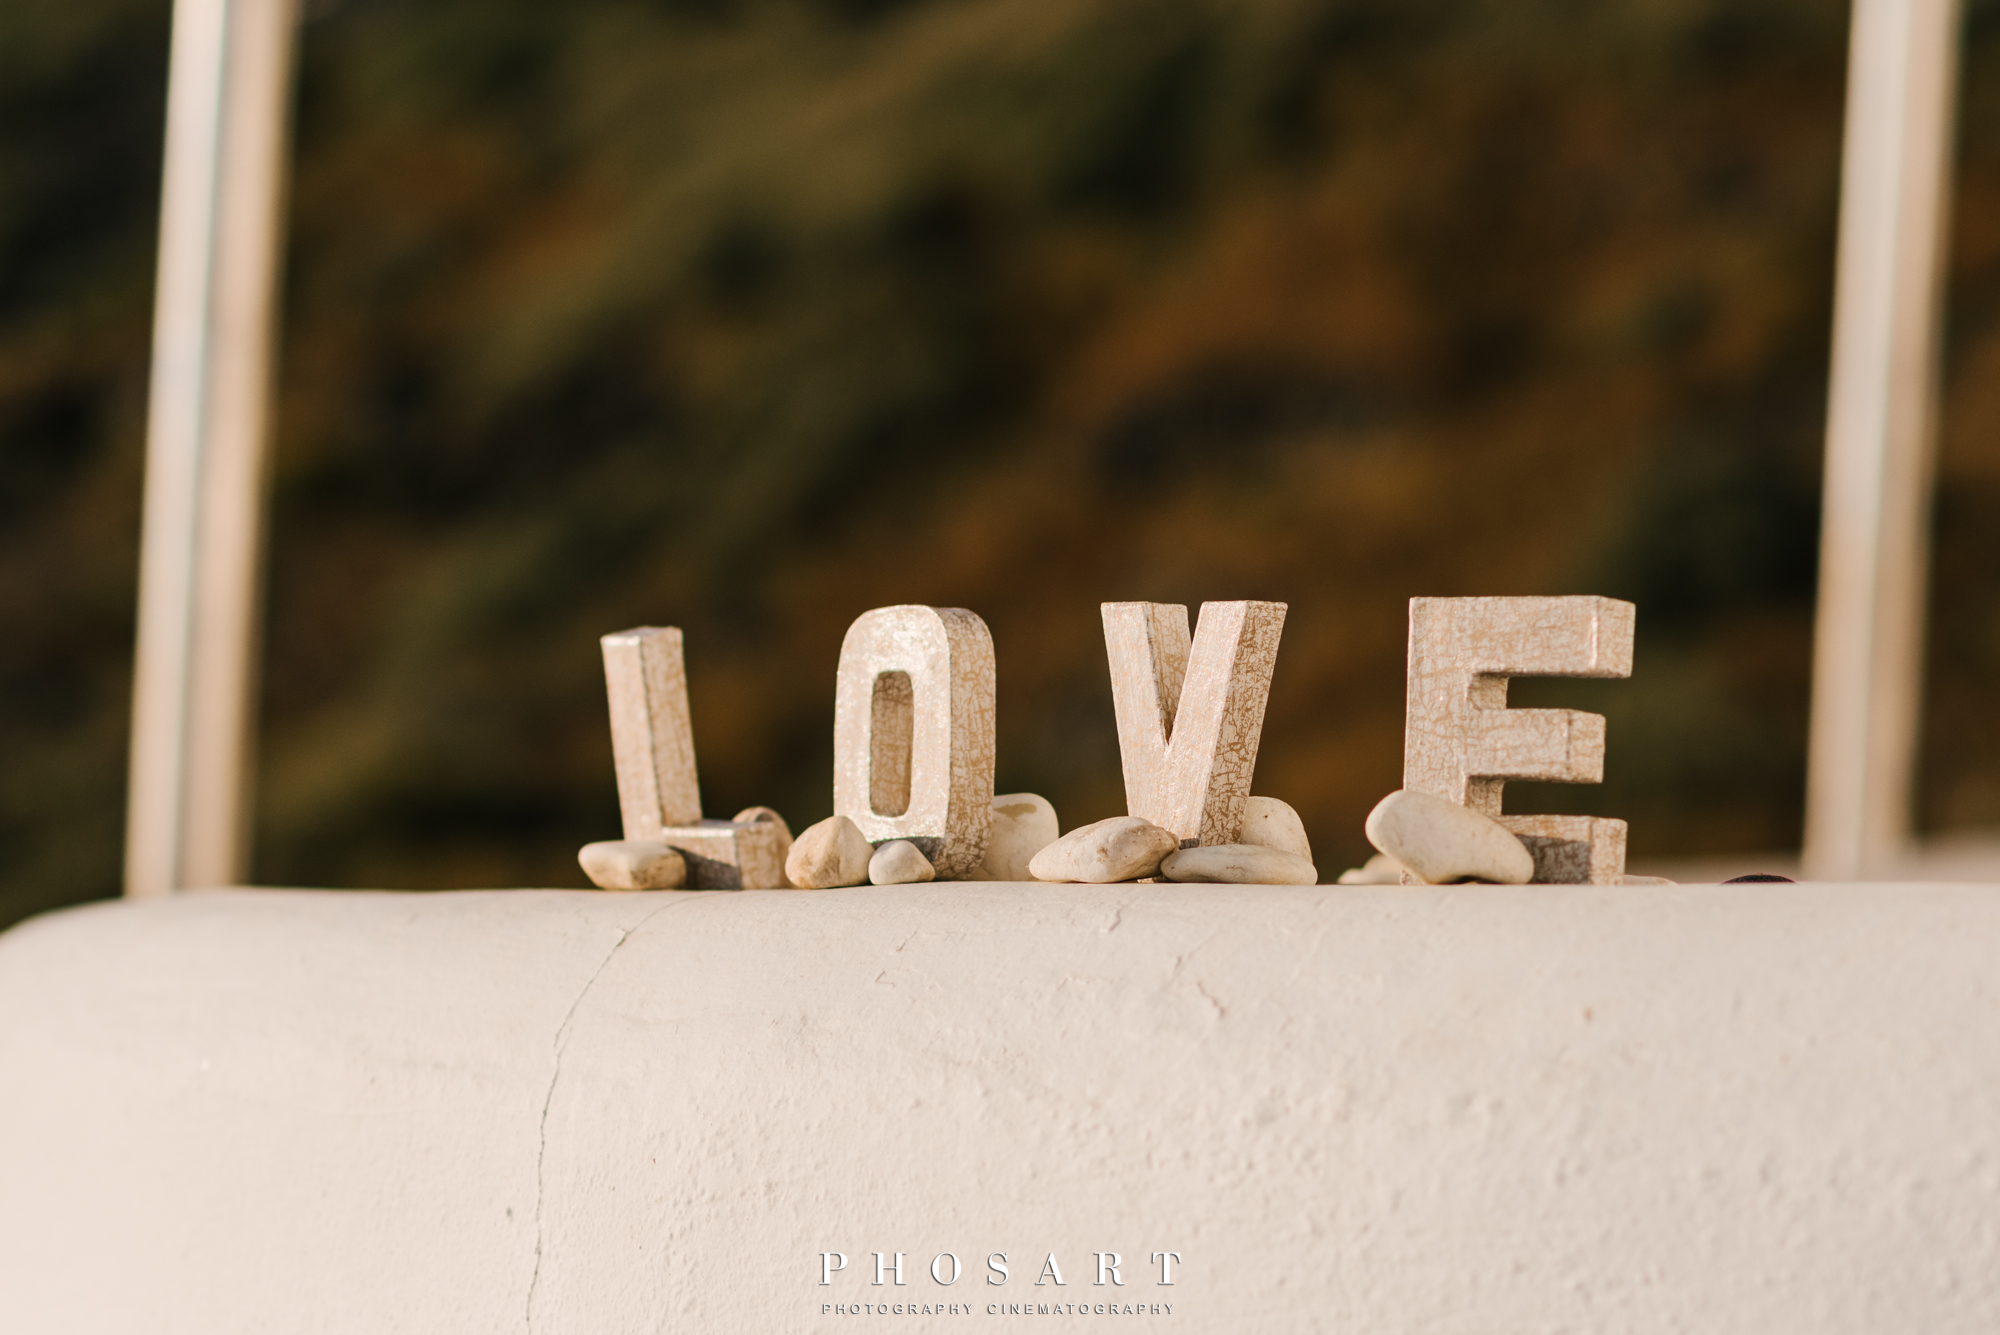 an ornament made of stone that shapes word love